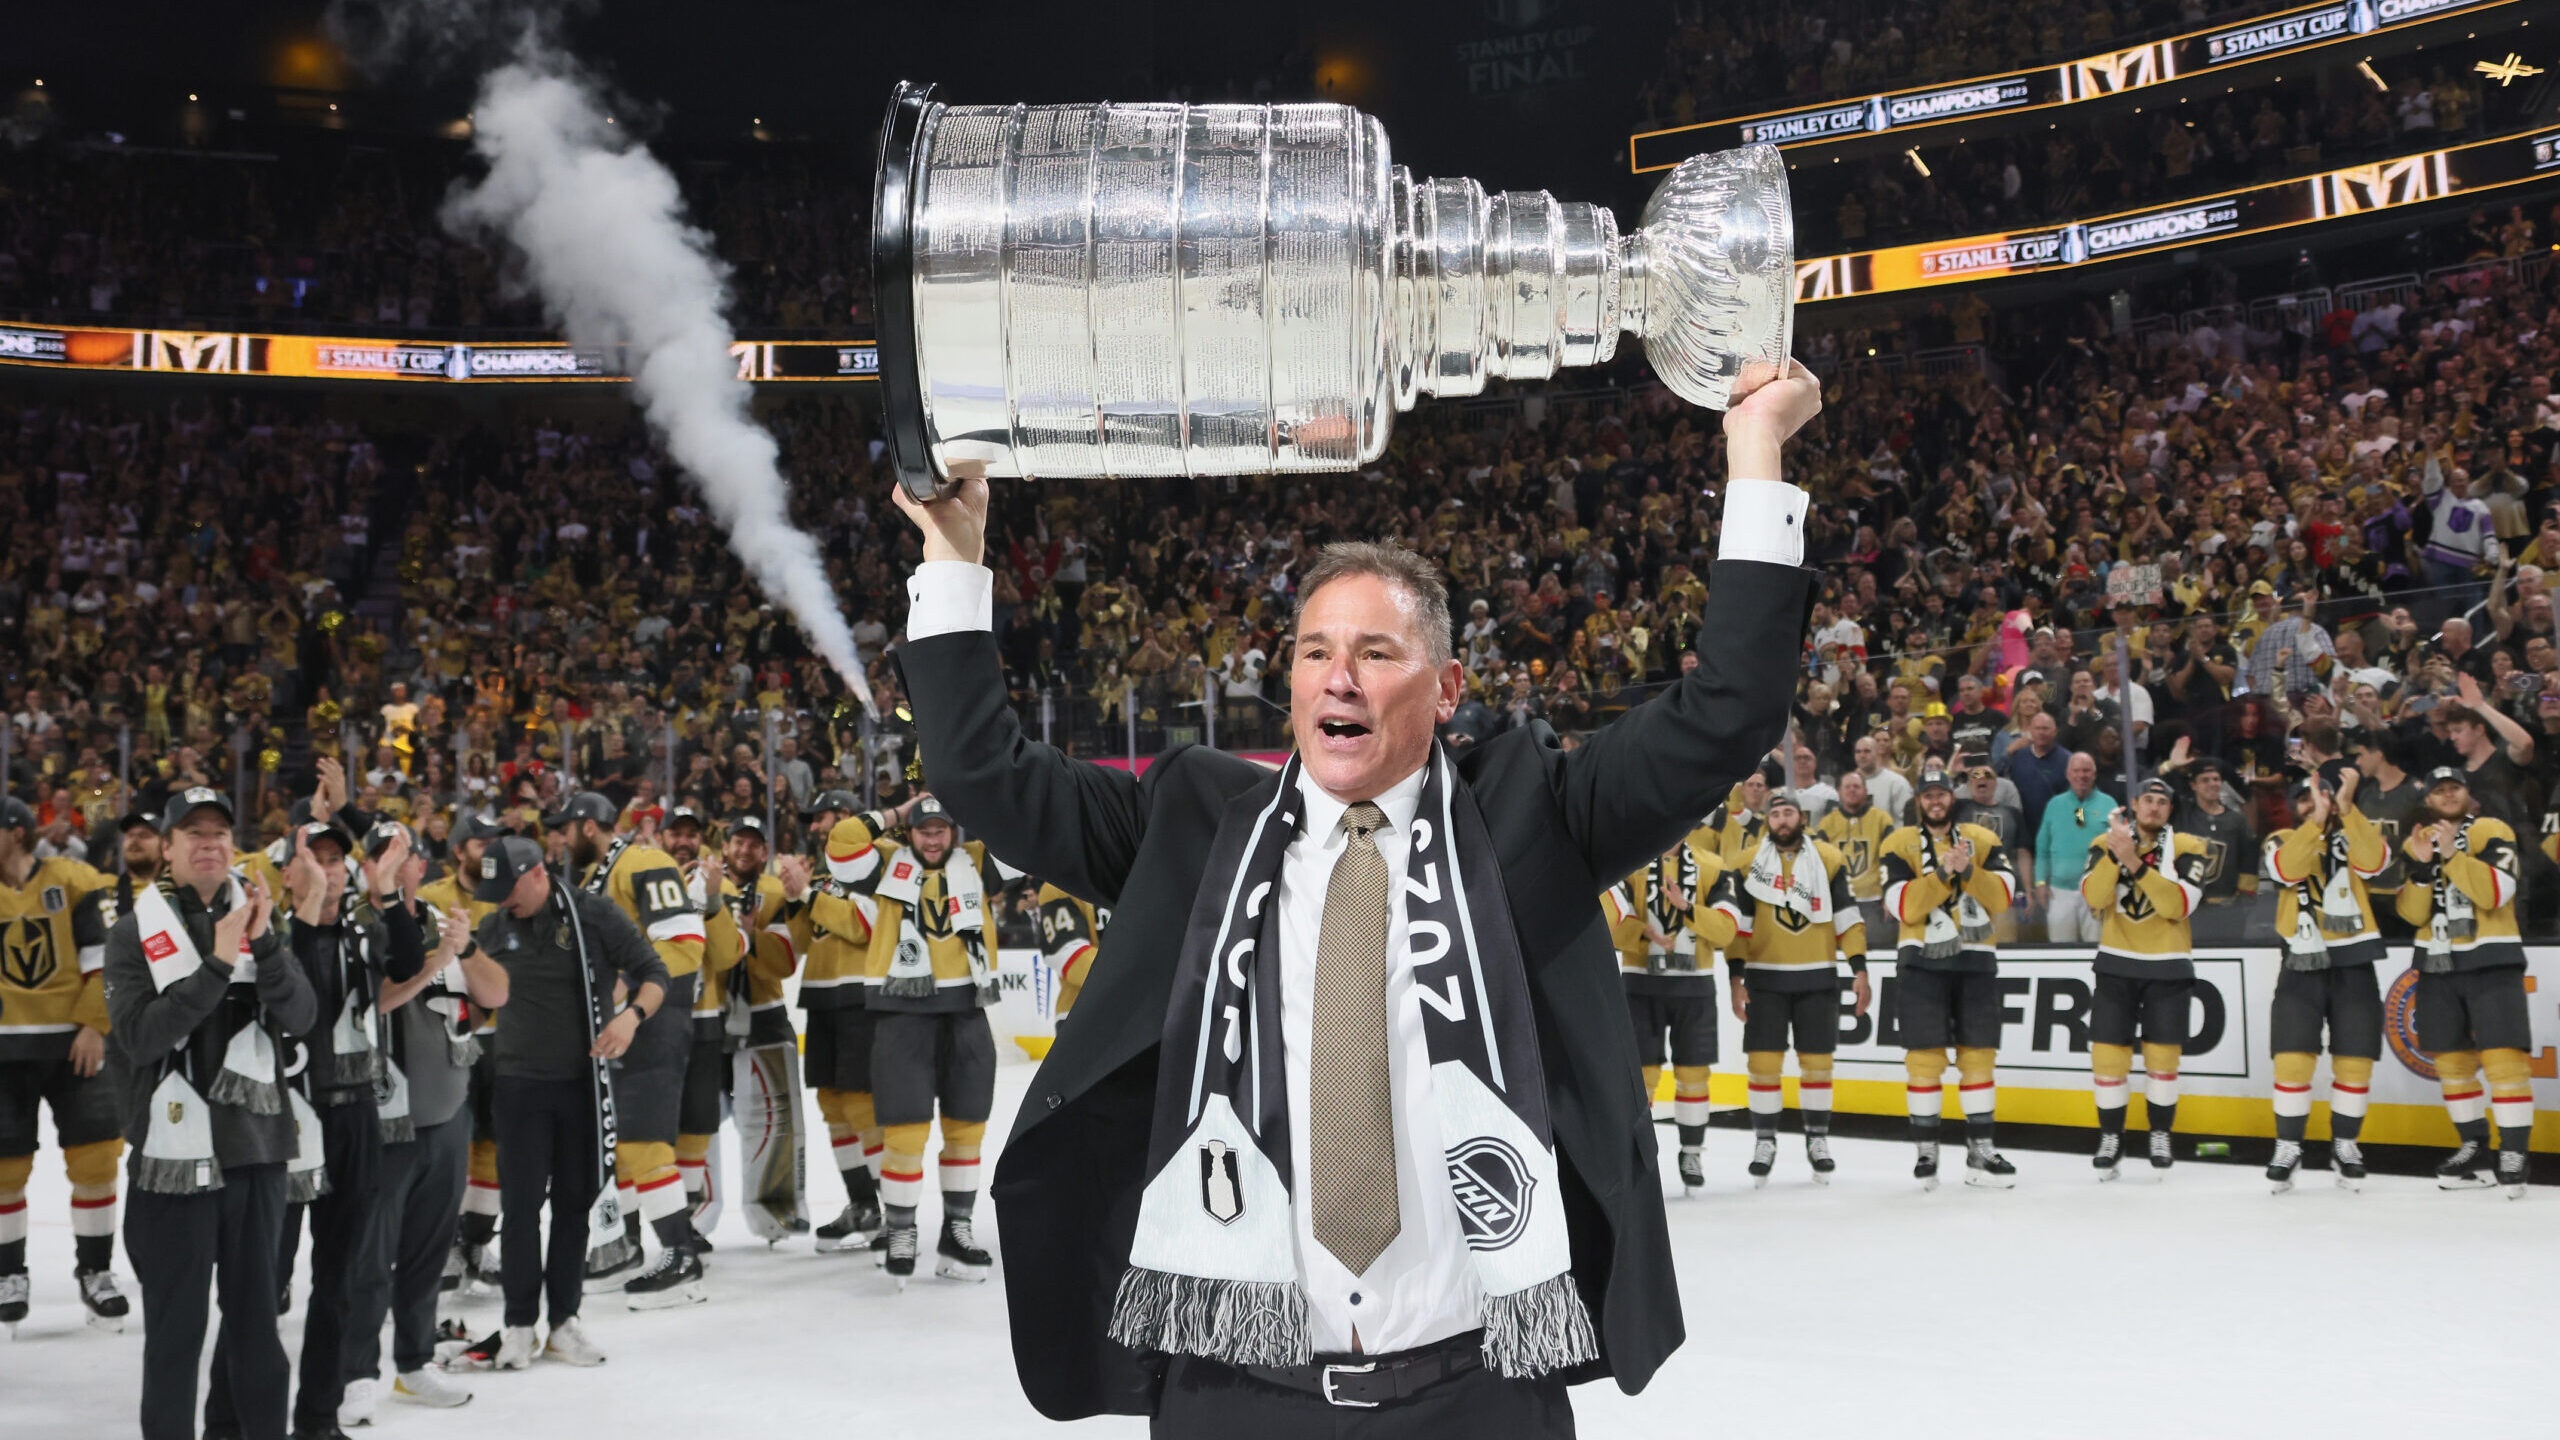 Golden Knights Coach Bruce Cassidy Proud To Bring Vegas 2nd Pro Sports Championship